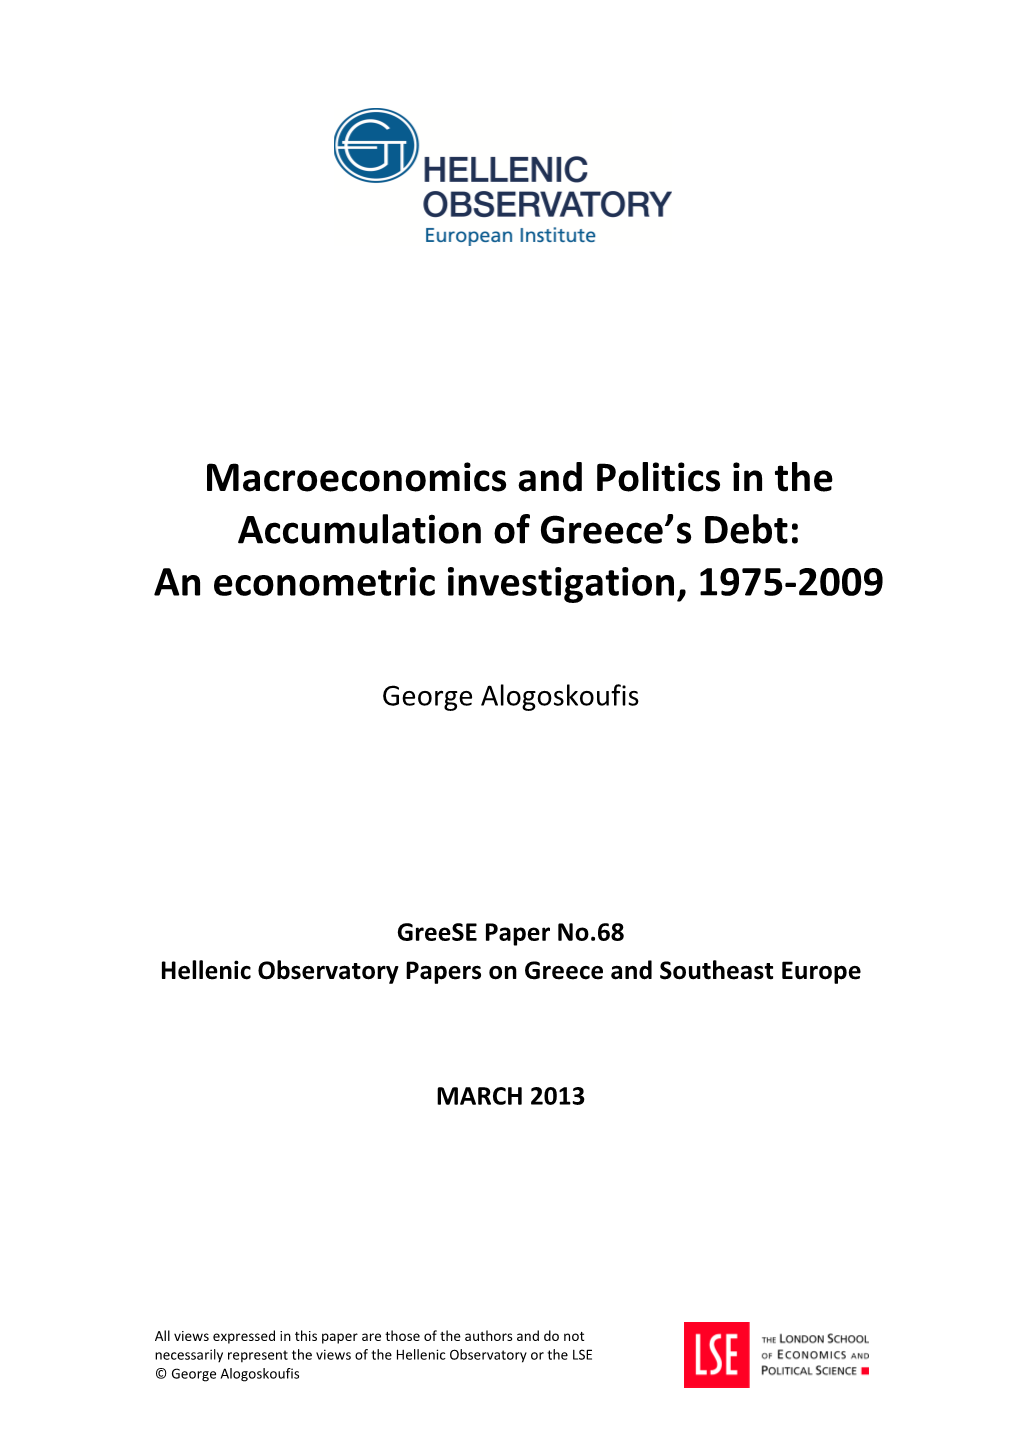 Macroeconomics and Politics in the Accumulation of Greece's Debt